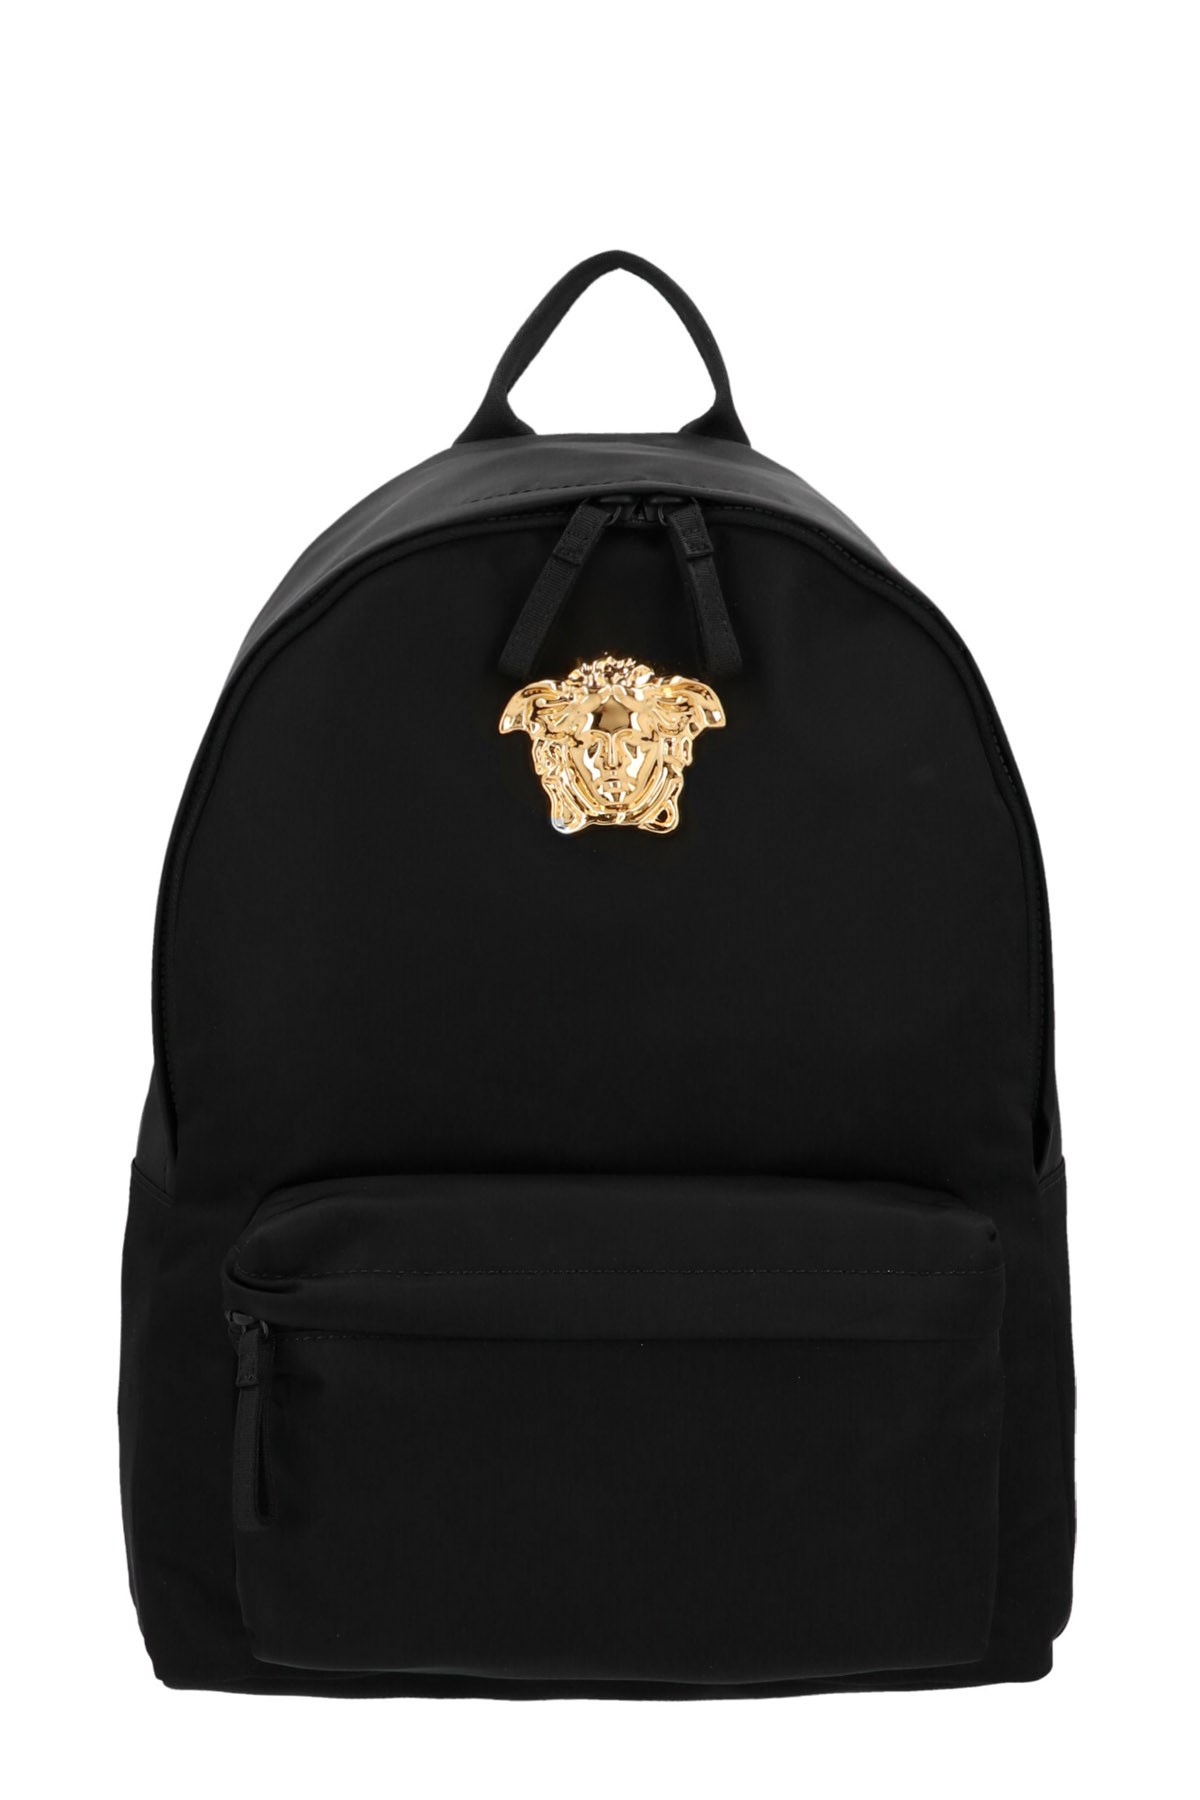 YOUNG VERSACE 'Medusa' Backpack